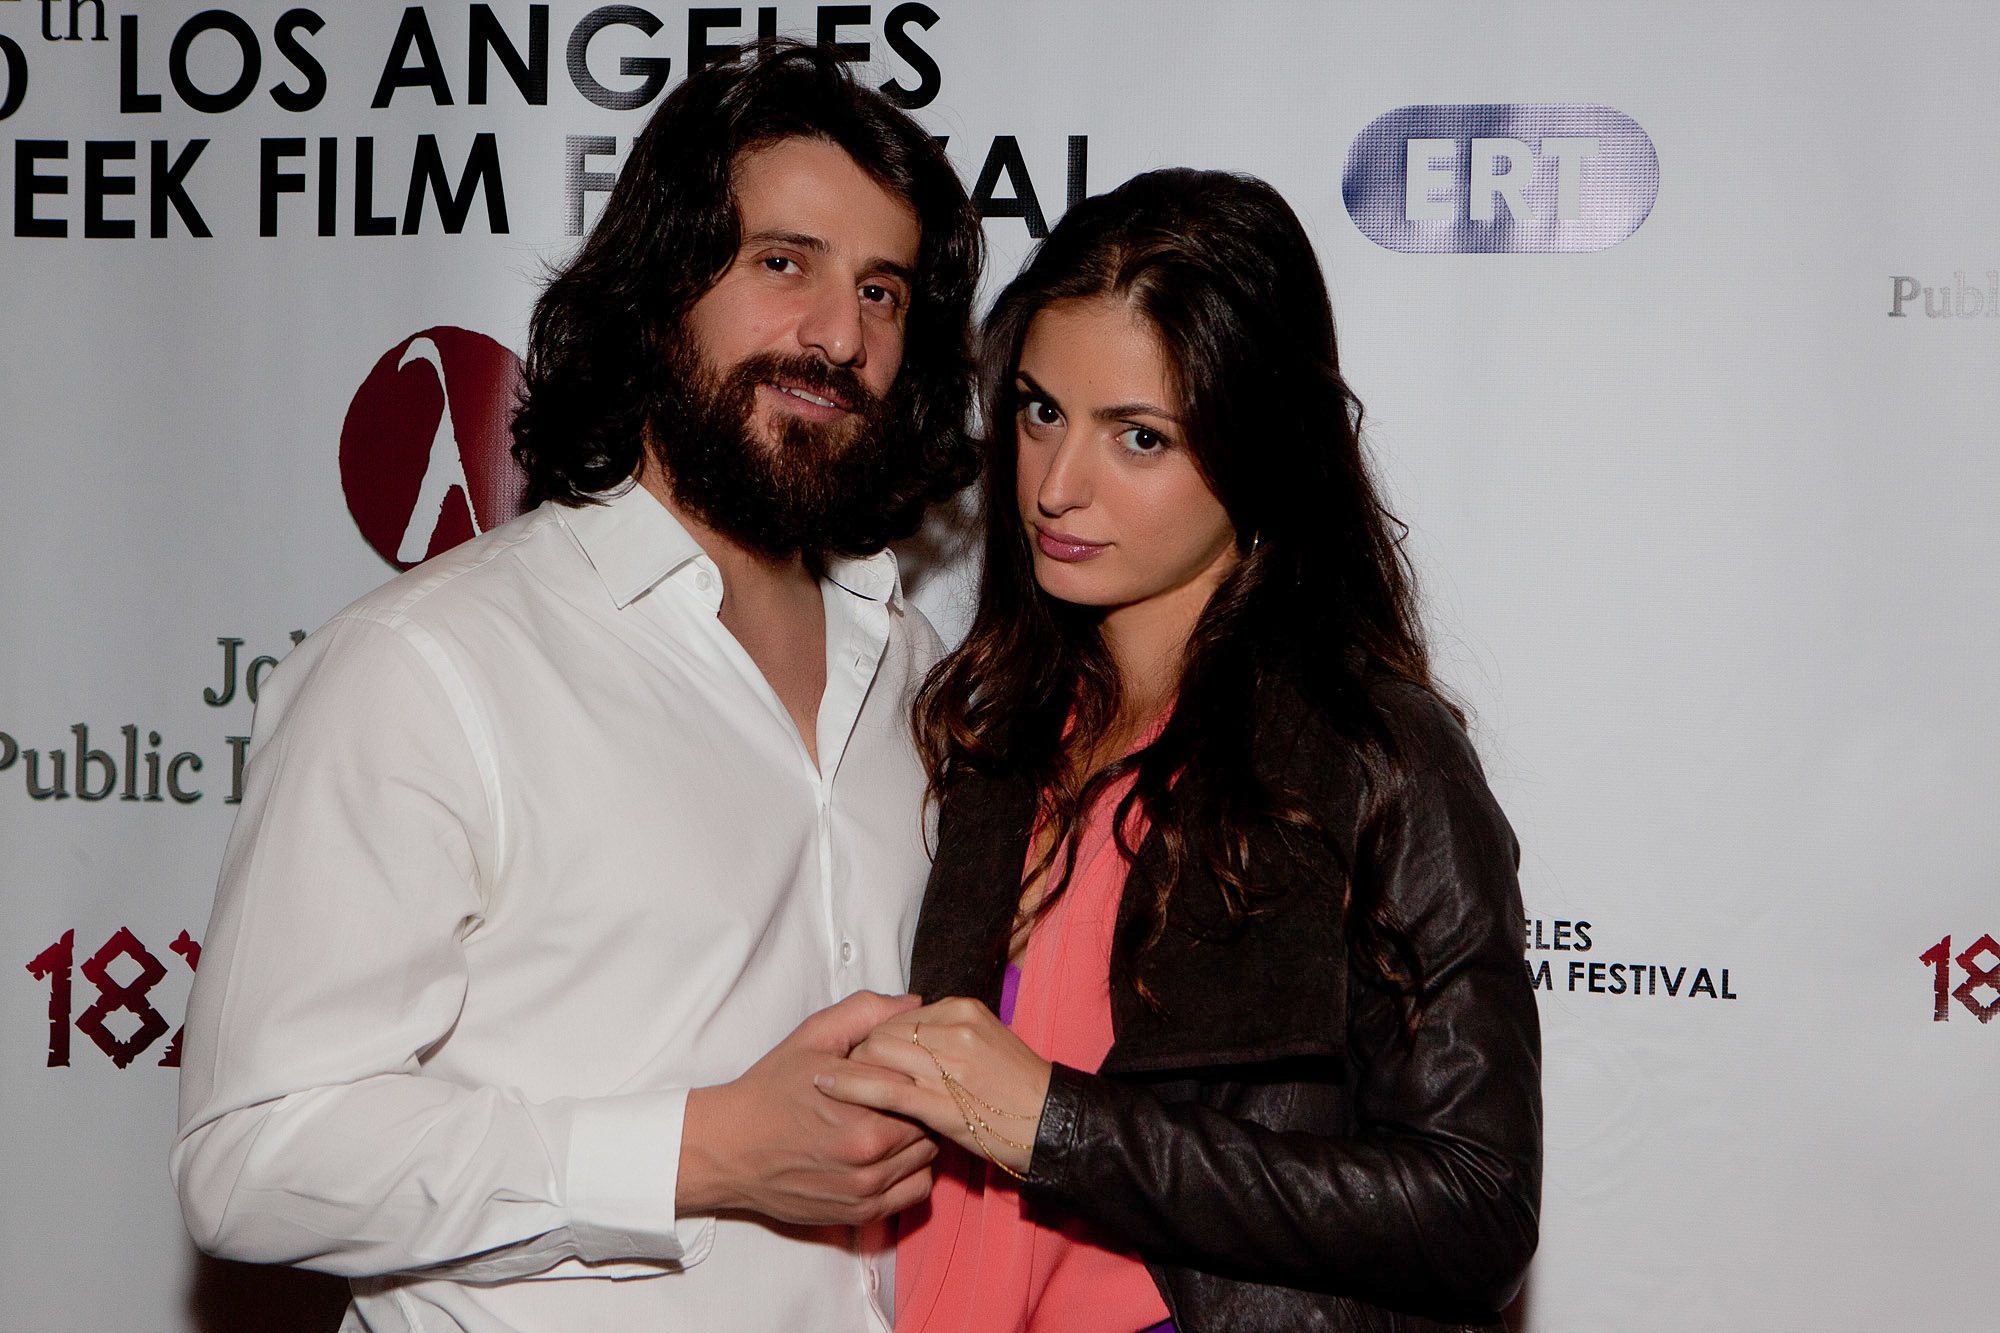 Alexis Georgoulis and Vicky Bakis at LAGFF